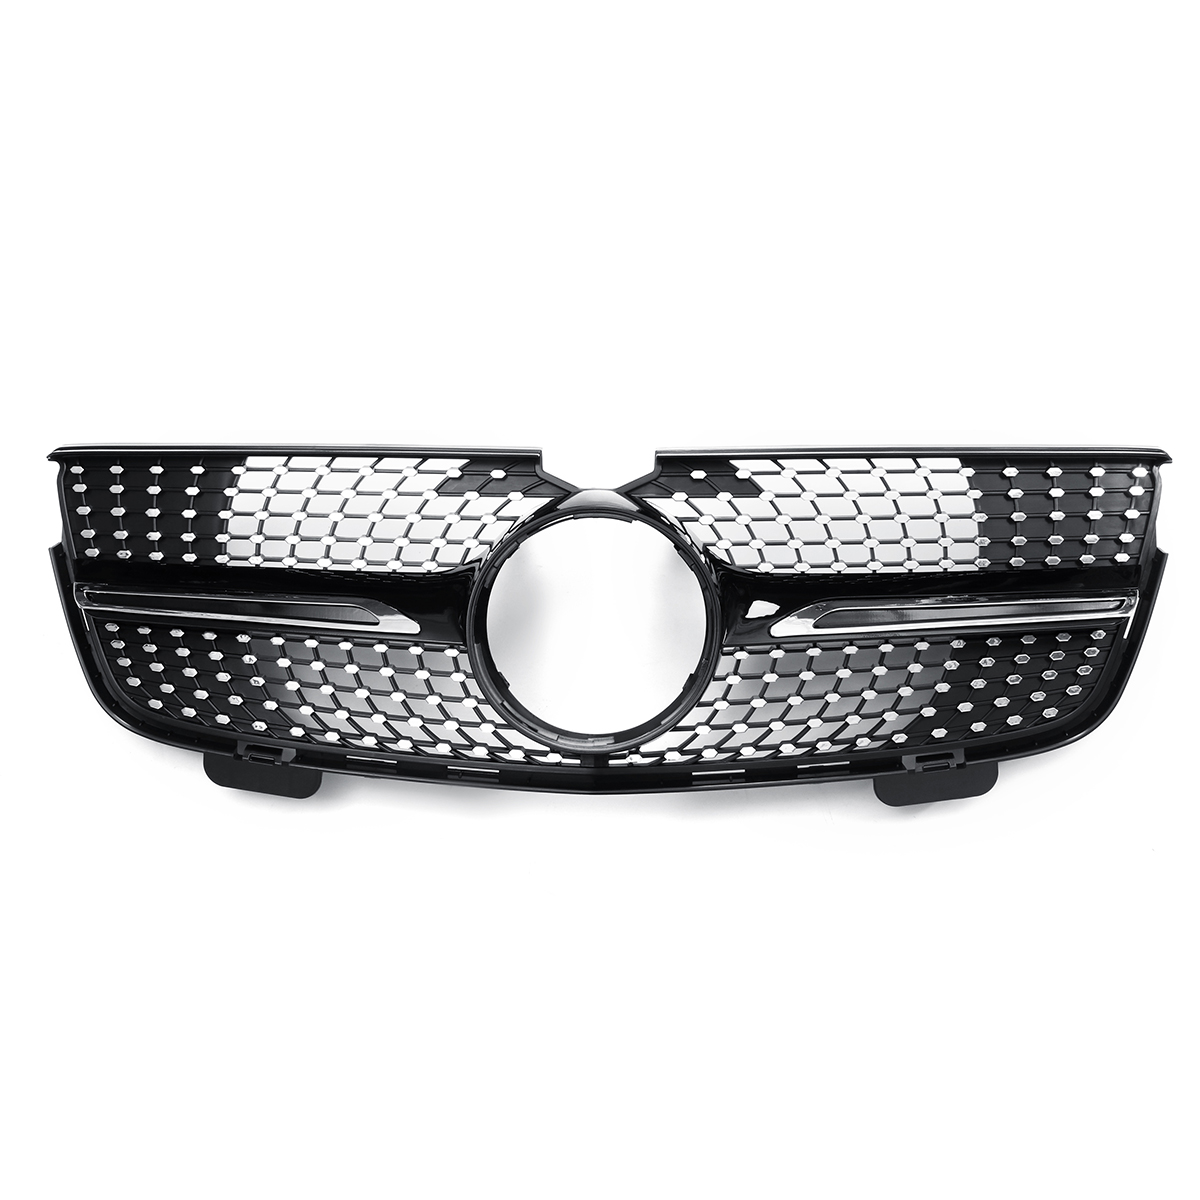 

Black Diamond Style Front Grille Grill For Mercedes-Benz GL-Class X164 GL320/350/450